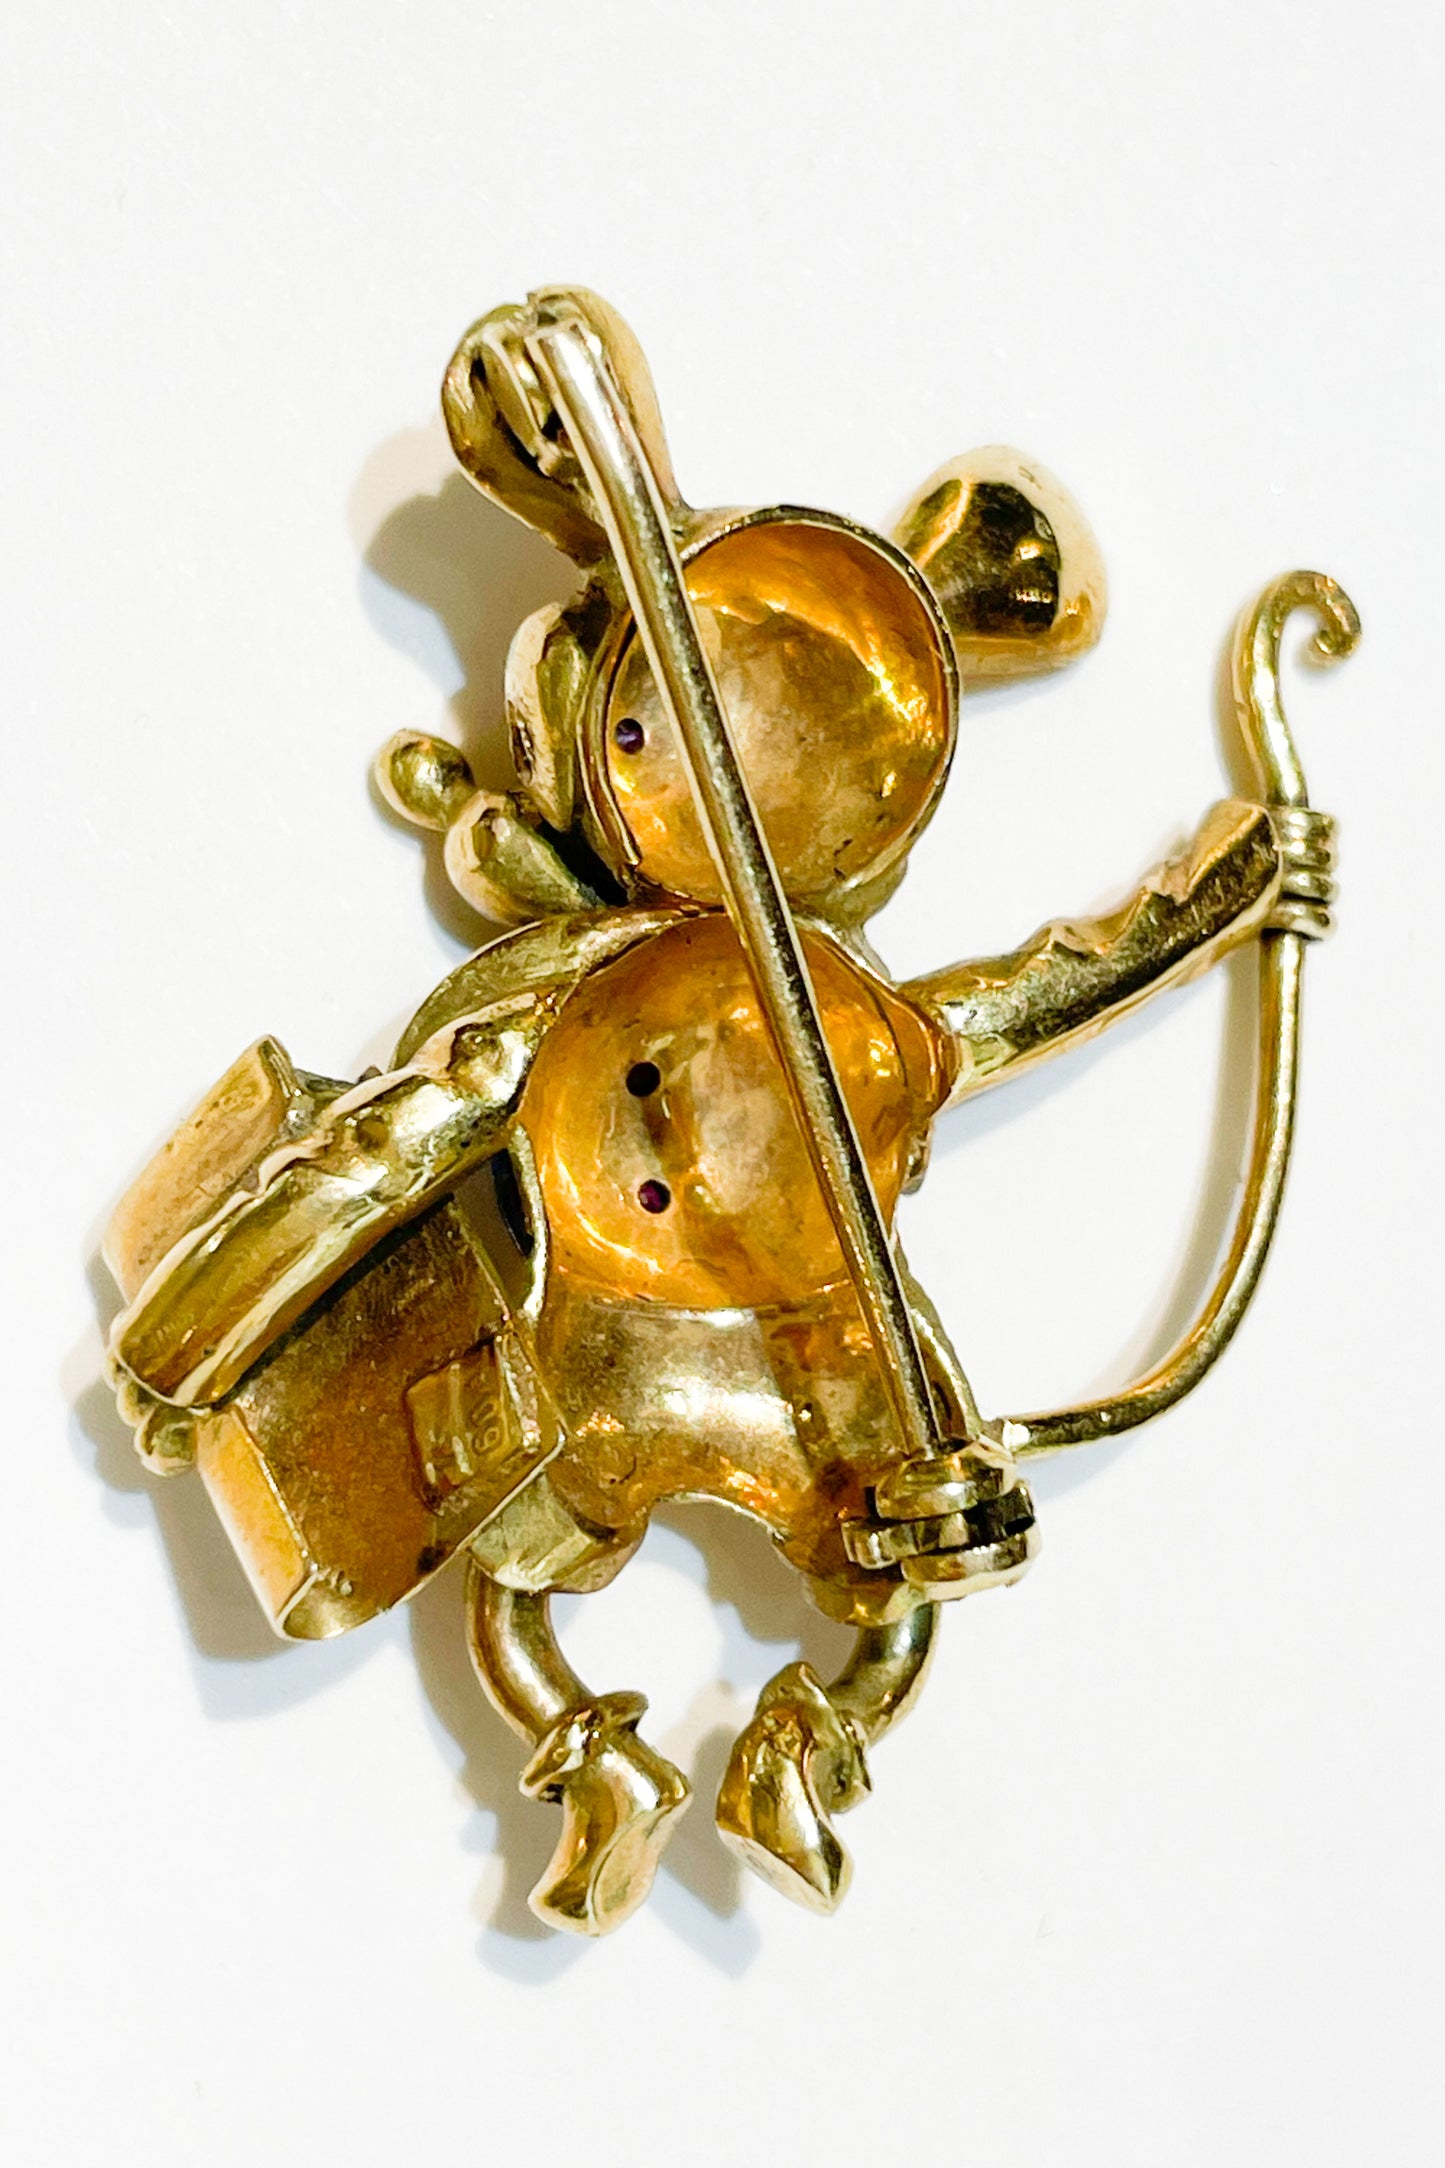 Topolino or Micky Mouse Brooch in gold and Enamels.